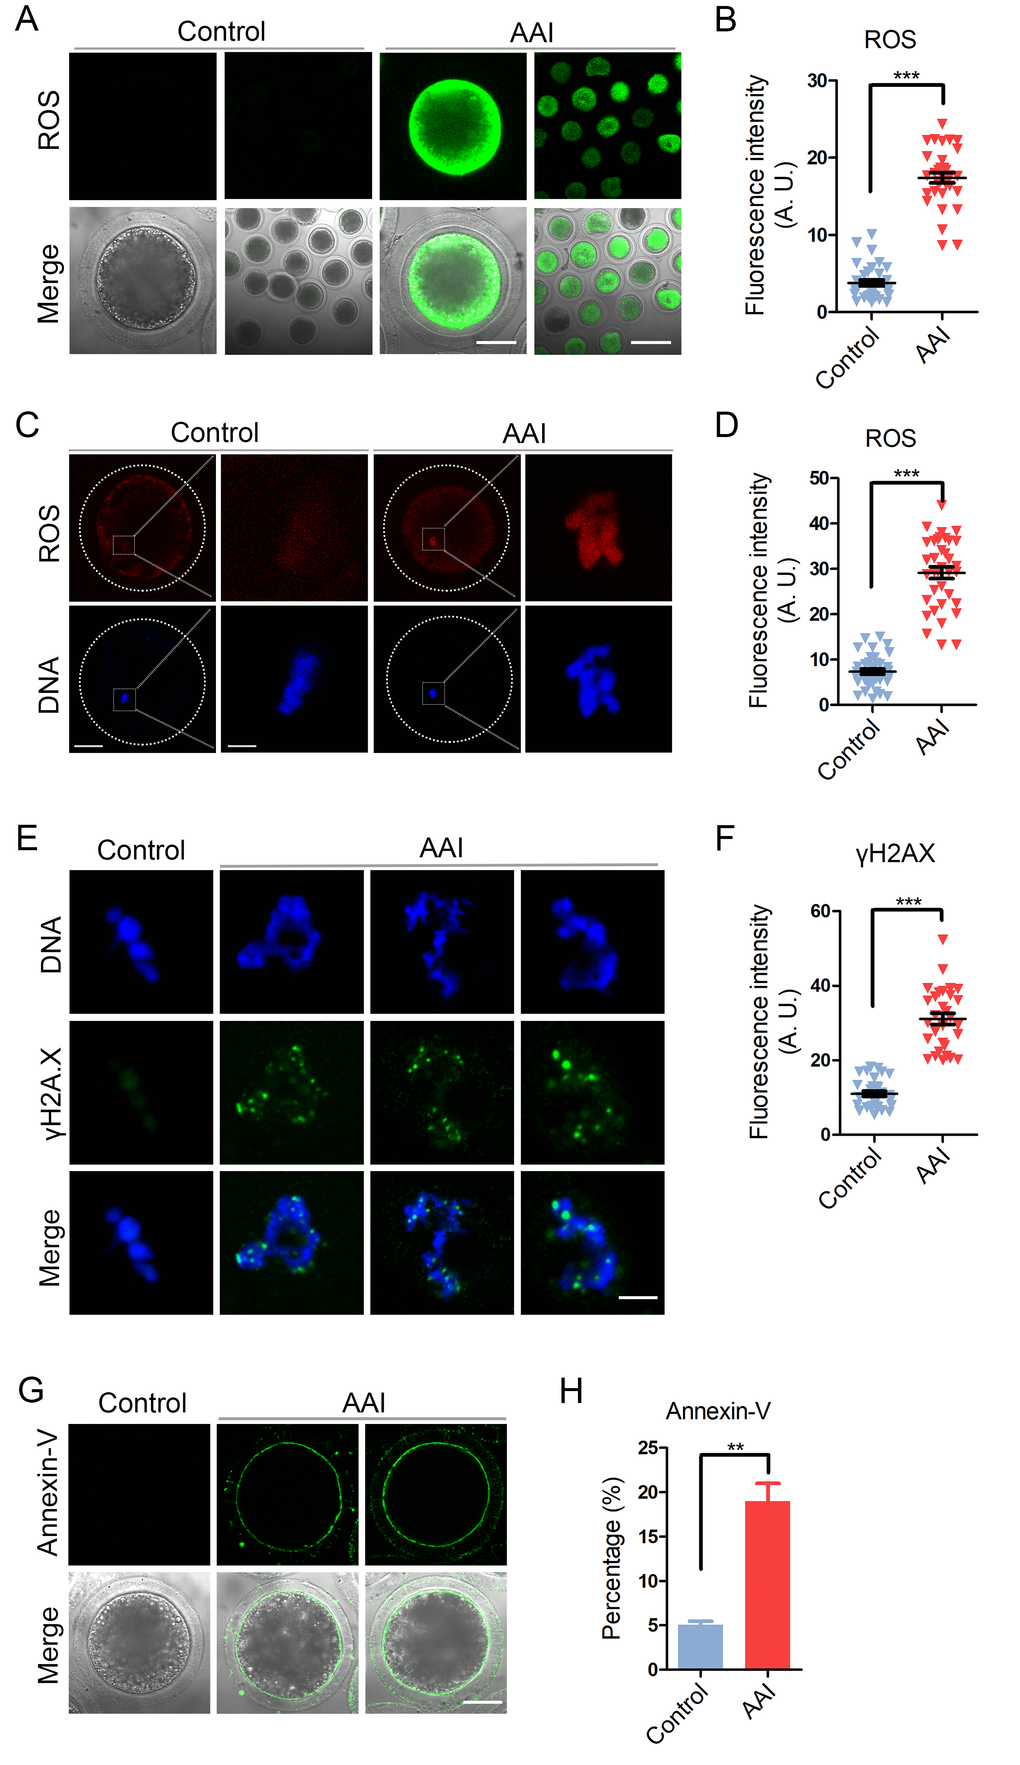 Effects of AAI exposure on the ROS level, DNA damage and early apoptosis in porcine oocytes. (A) Representative images of DCFH staining in control and AAI-exposed oocytes. Scale bar, 40 and 80 μm. (B) The fluorescence intensity of ROS levels was recorded in control and AAI-exposed oocytes. (C) Representative images of DHE staining in control and AAI-exposed oocytes. Scale bar, 20 and 5 μm. (D) The fluorescence intensity of ROS levels was recorded in control and AAI-exposed oocytes. (E) Representative images of DNA damage in control and AAI-exposed oocytes. Scale bar, 5 μm. (F) The fluorescence intensity of γH2AX signals was measured in control and AAI-exposed oocytes. (G) Representative images of apoptotic oocytes in control and AAI-exposed groups. Scale bar, 40 μm. (H) The rate of apoptotic oocytes was recorded in control and AAI-exposed groups. Data in (B), (D), (F) and (H) were presented as mean percentage (mean ± SEM) of at least three independent experiments. **P 